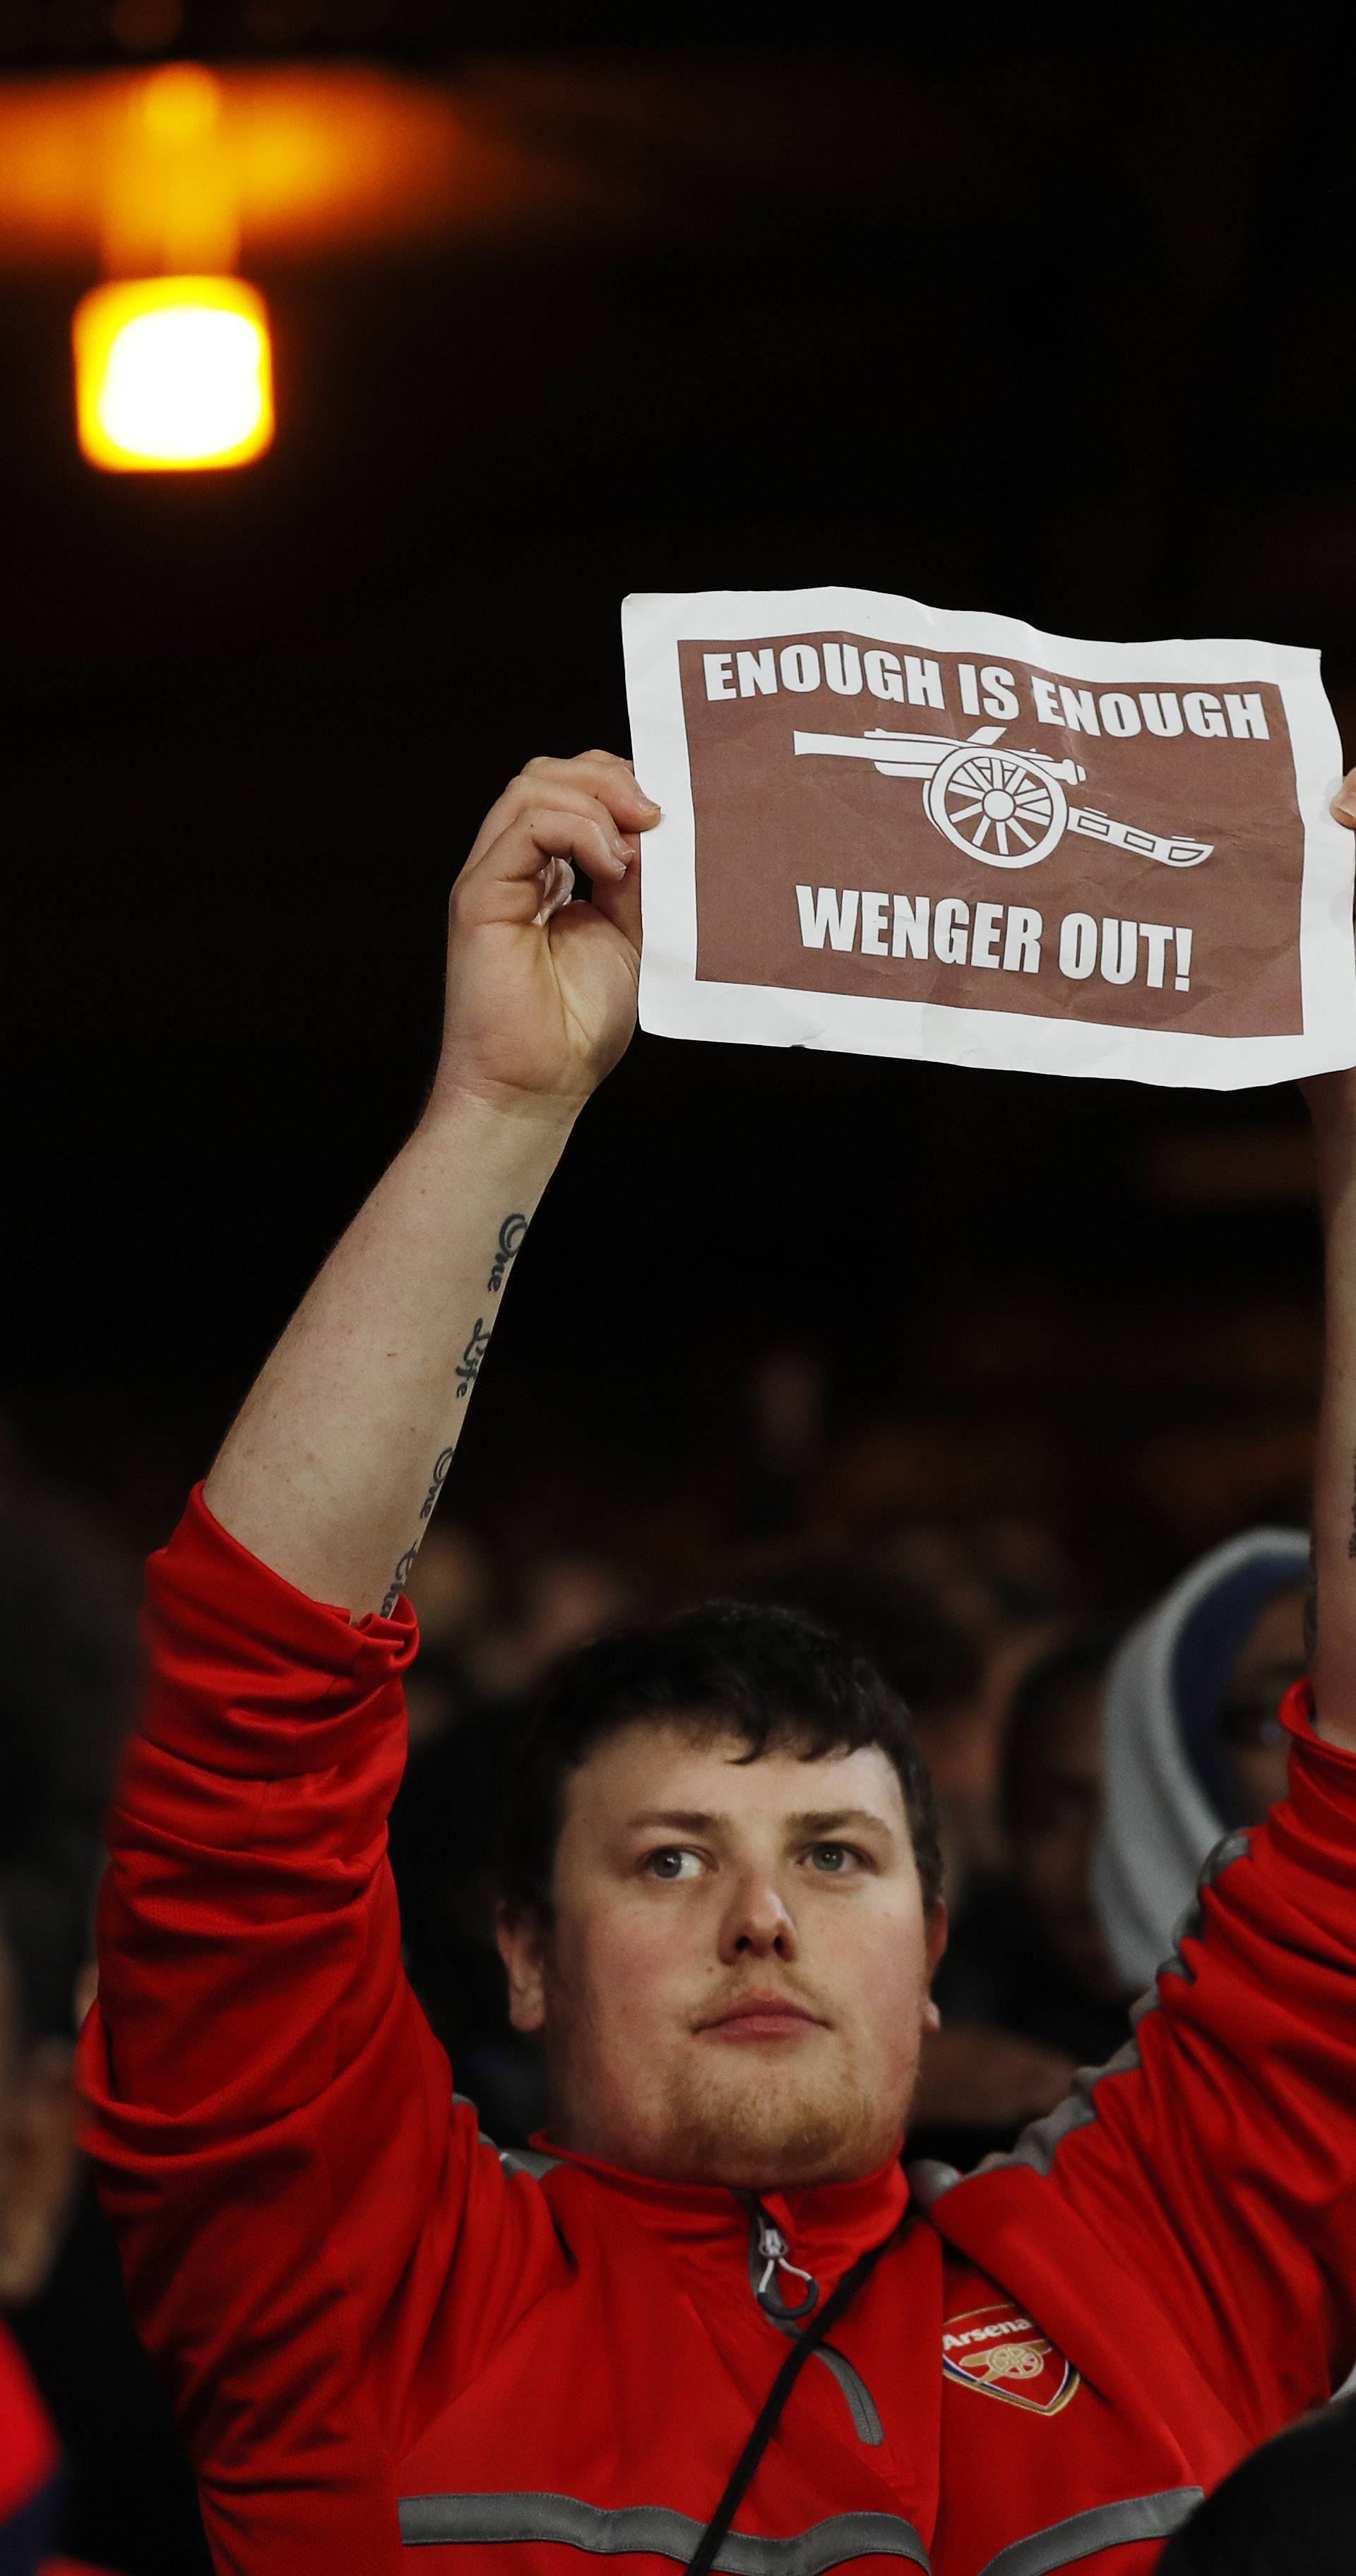 Arsenal fan holds up a message directed at manager Arsene Wenger